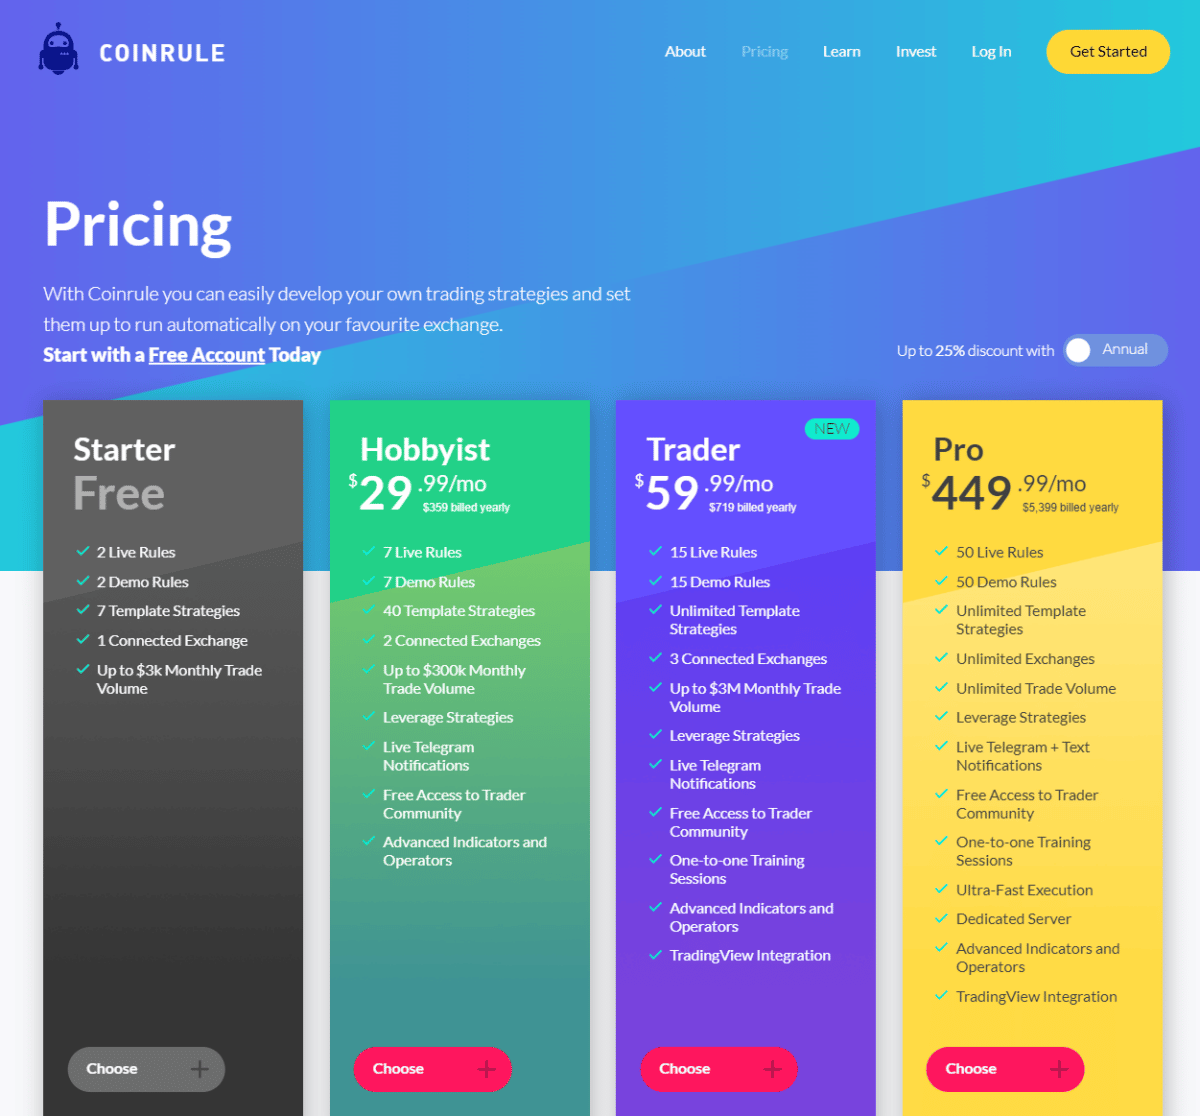 The Coinrule annual pricing